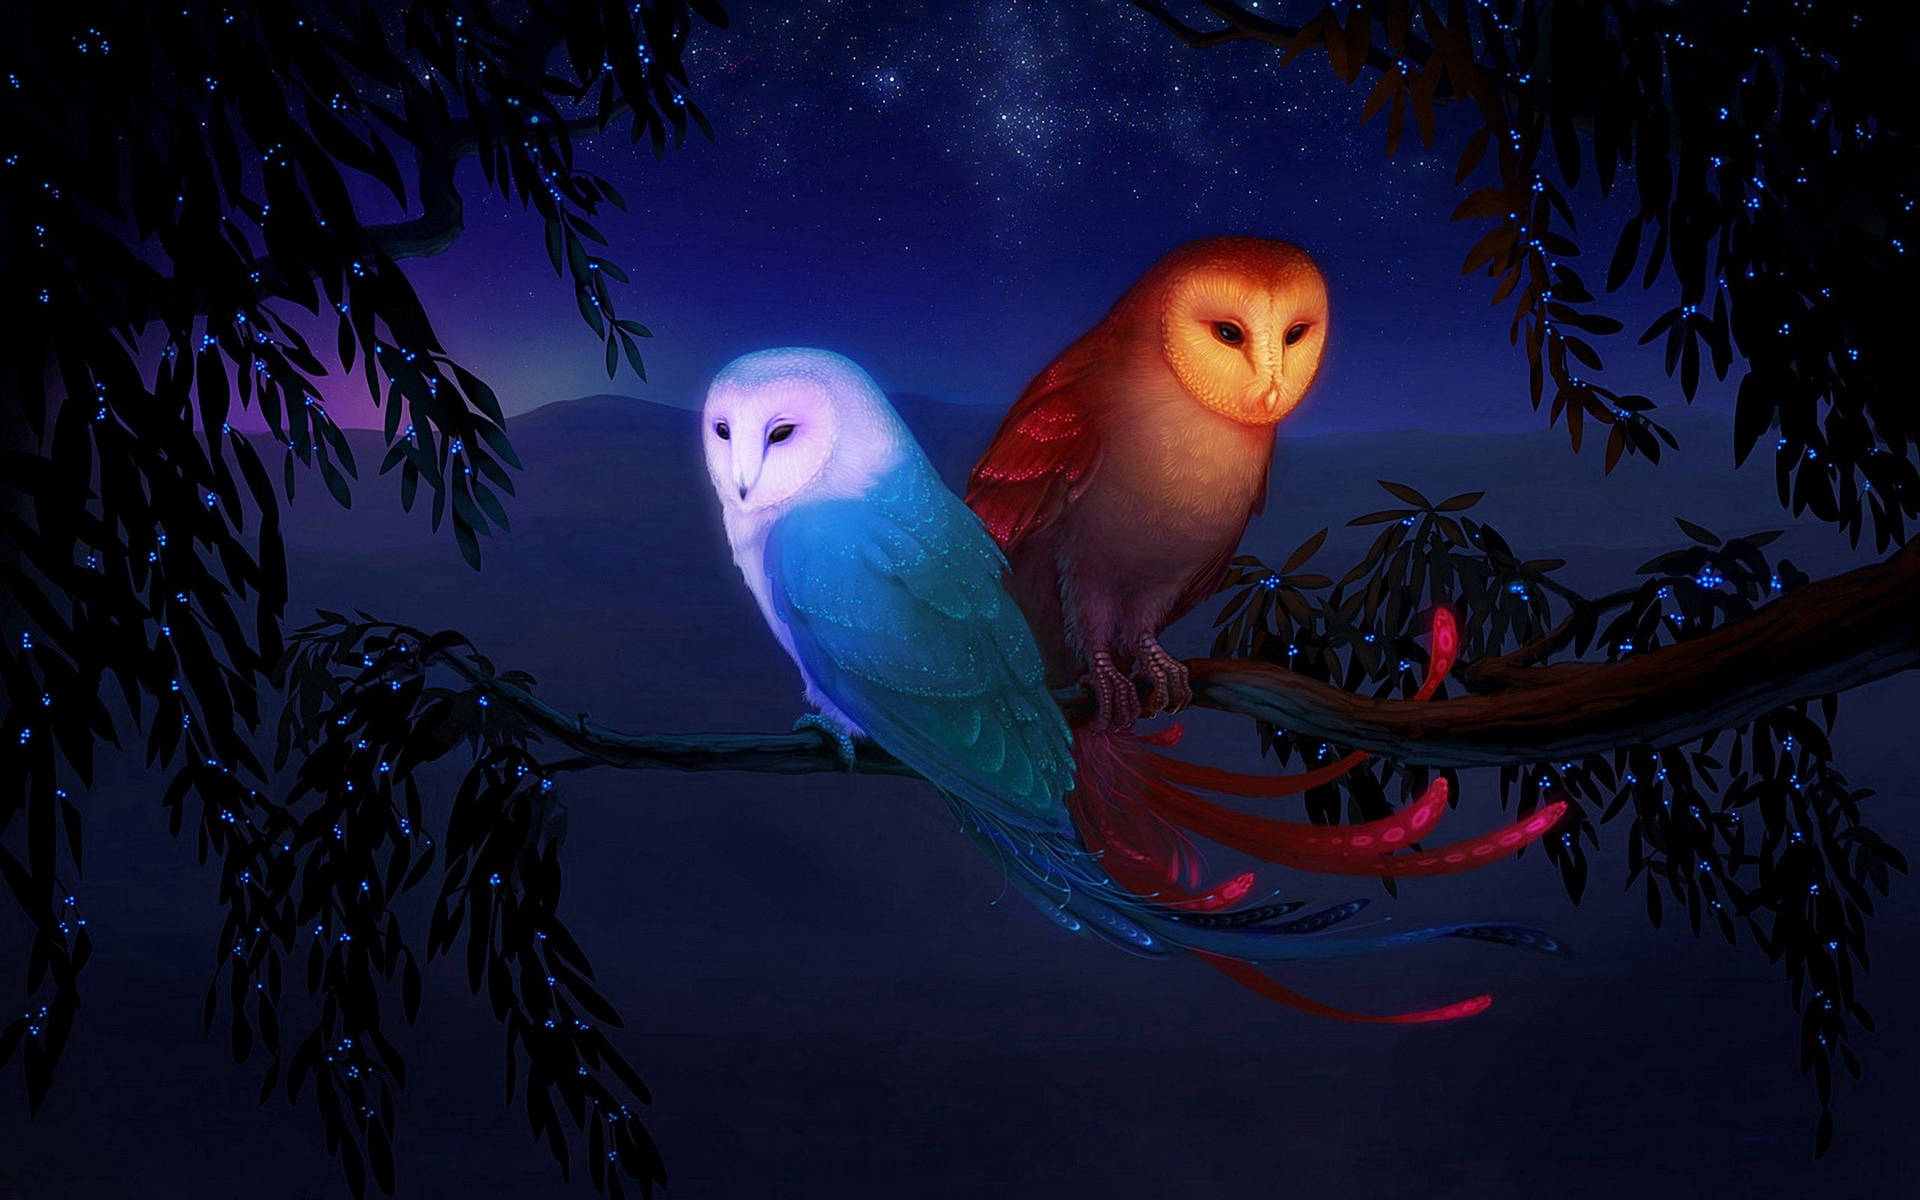 Two Owls Standing in a Nocturnal Scene Wallpaper